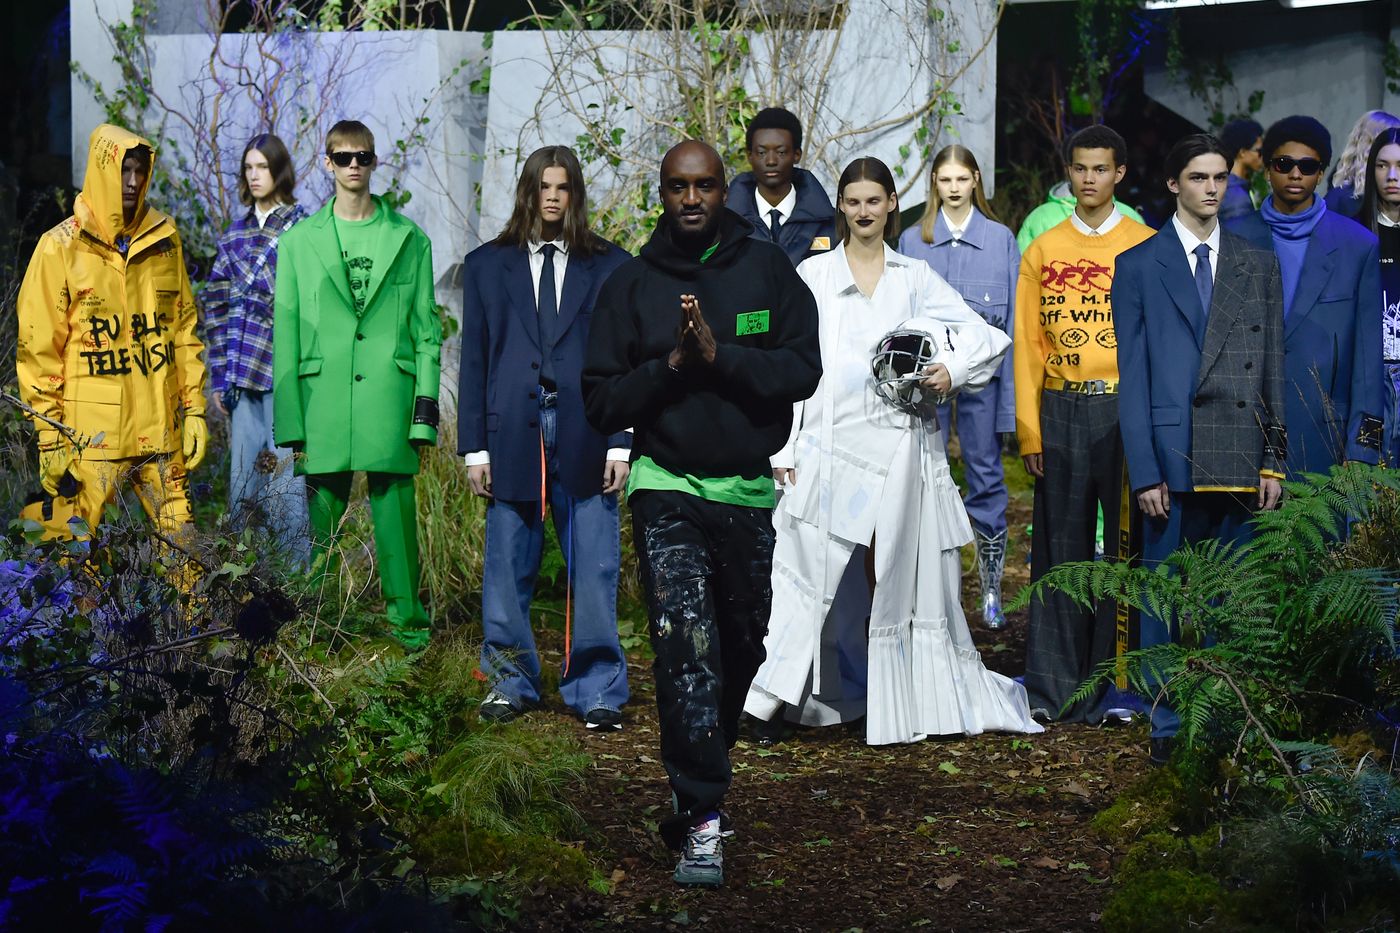 Virgil Abloh, known for his '3% approach' to fashion design, dies at 41